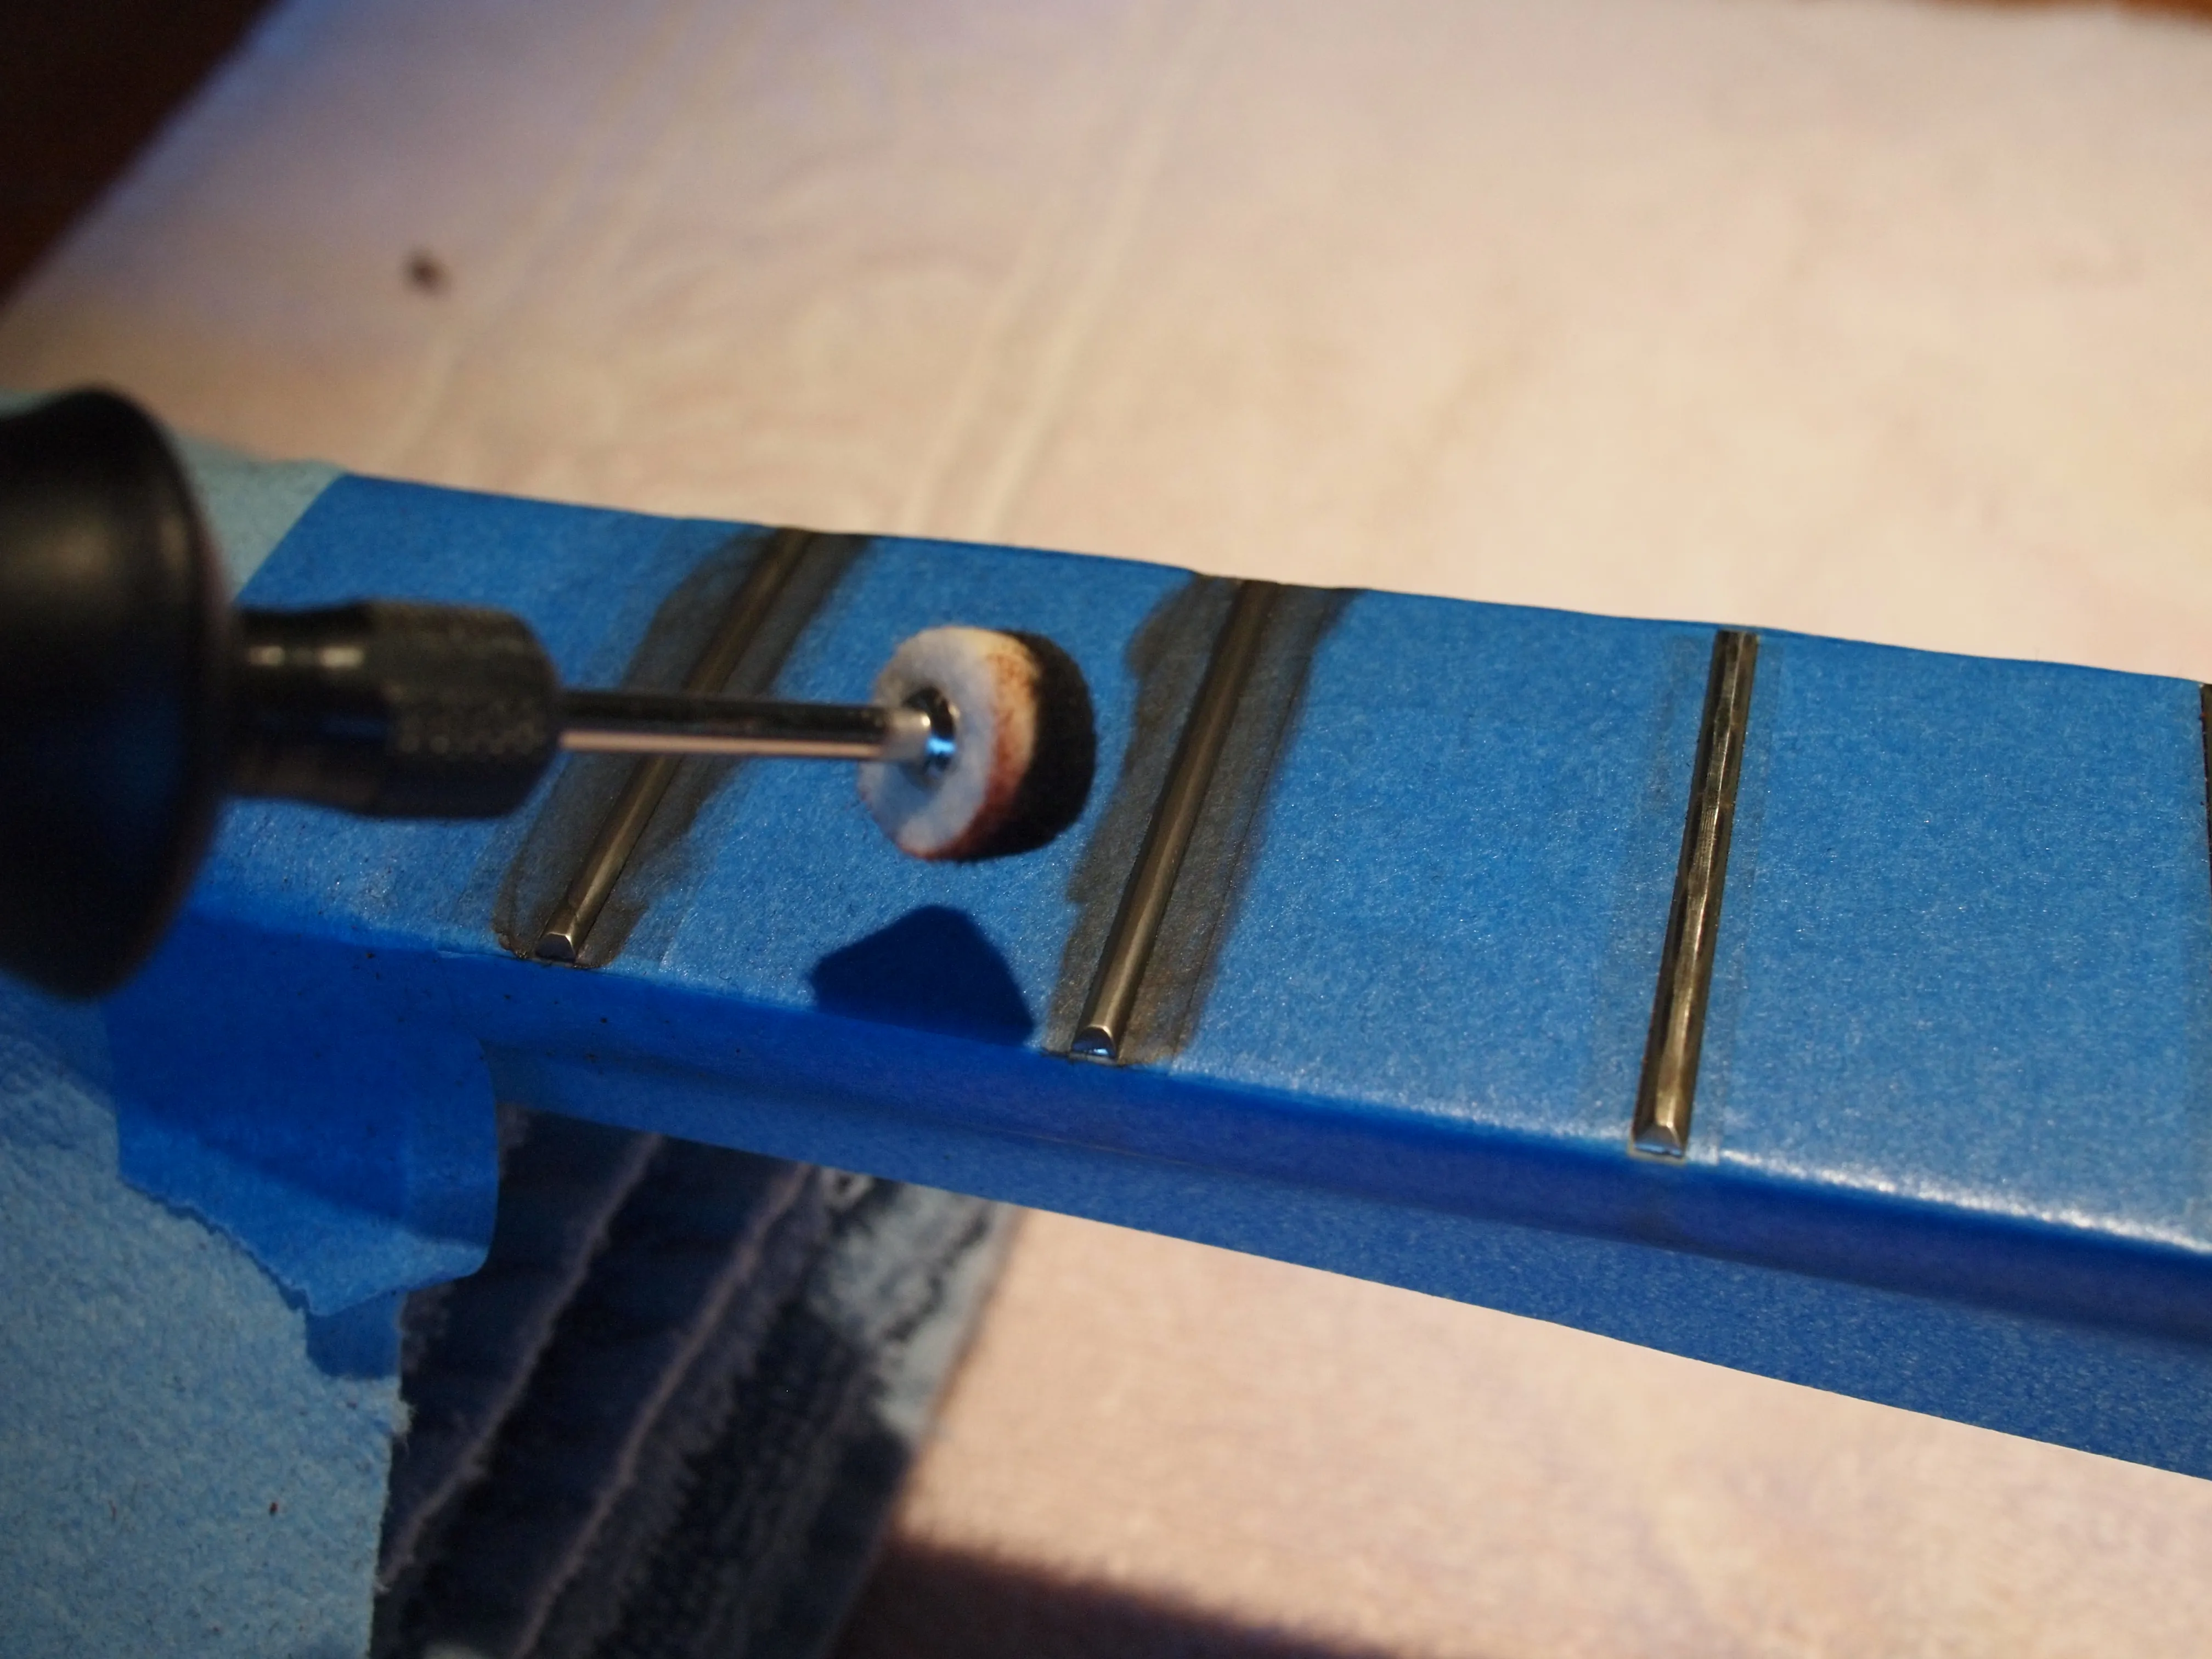 Set the Dremel to medium speed and spend about 20-30 seconds per fret until all of the fret surface is polished.